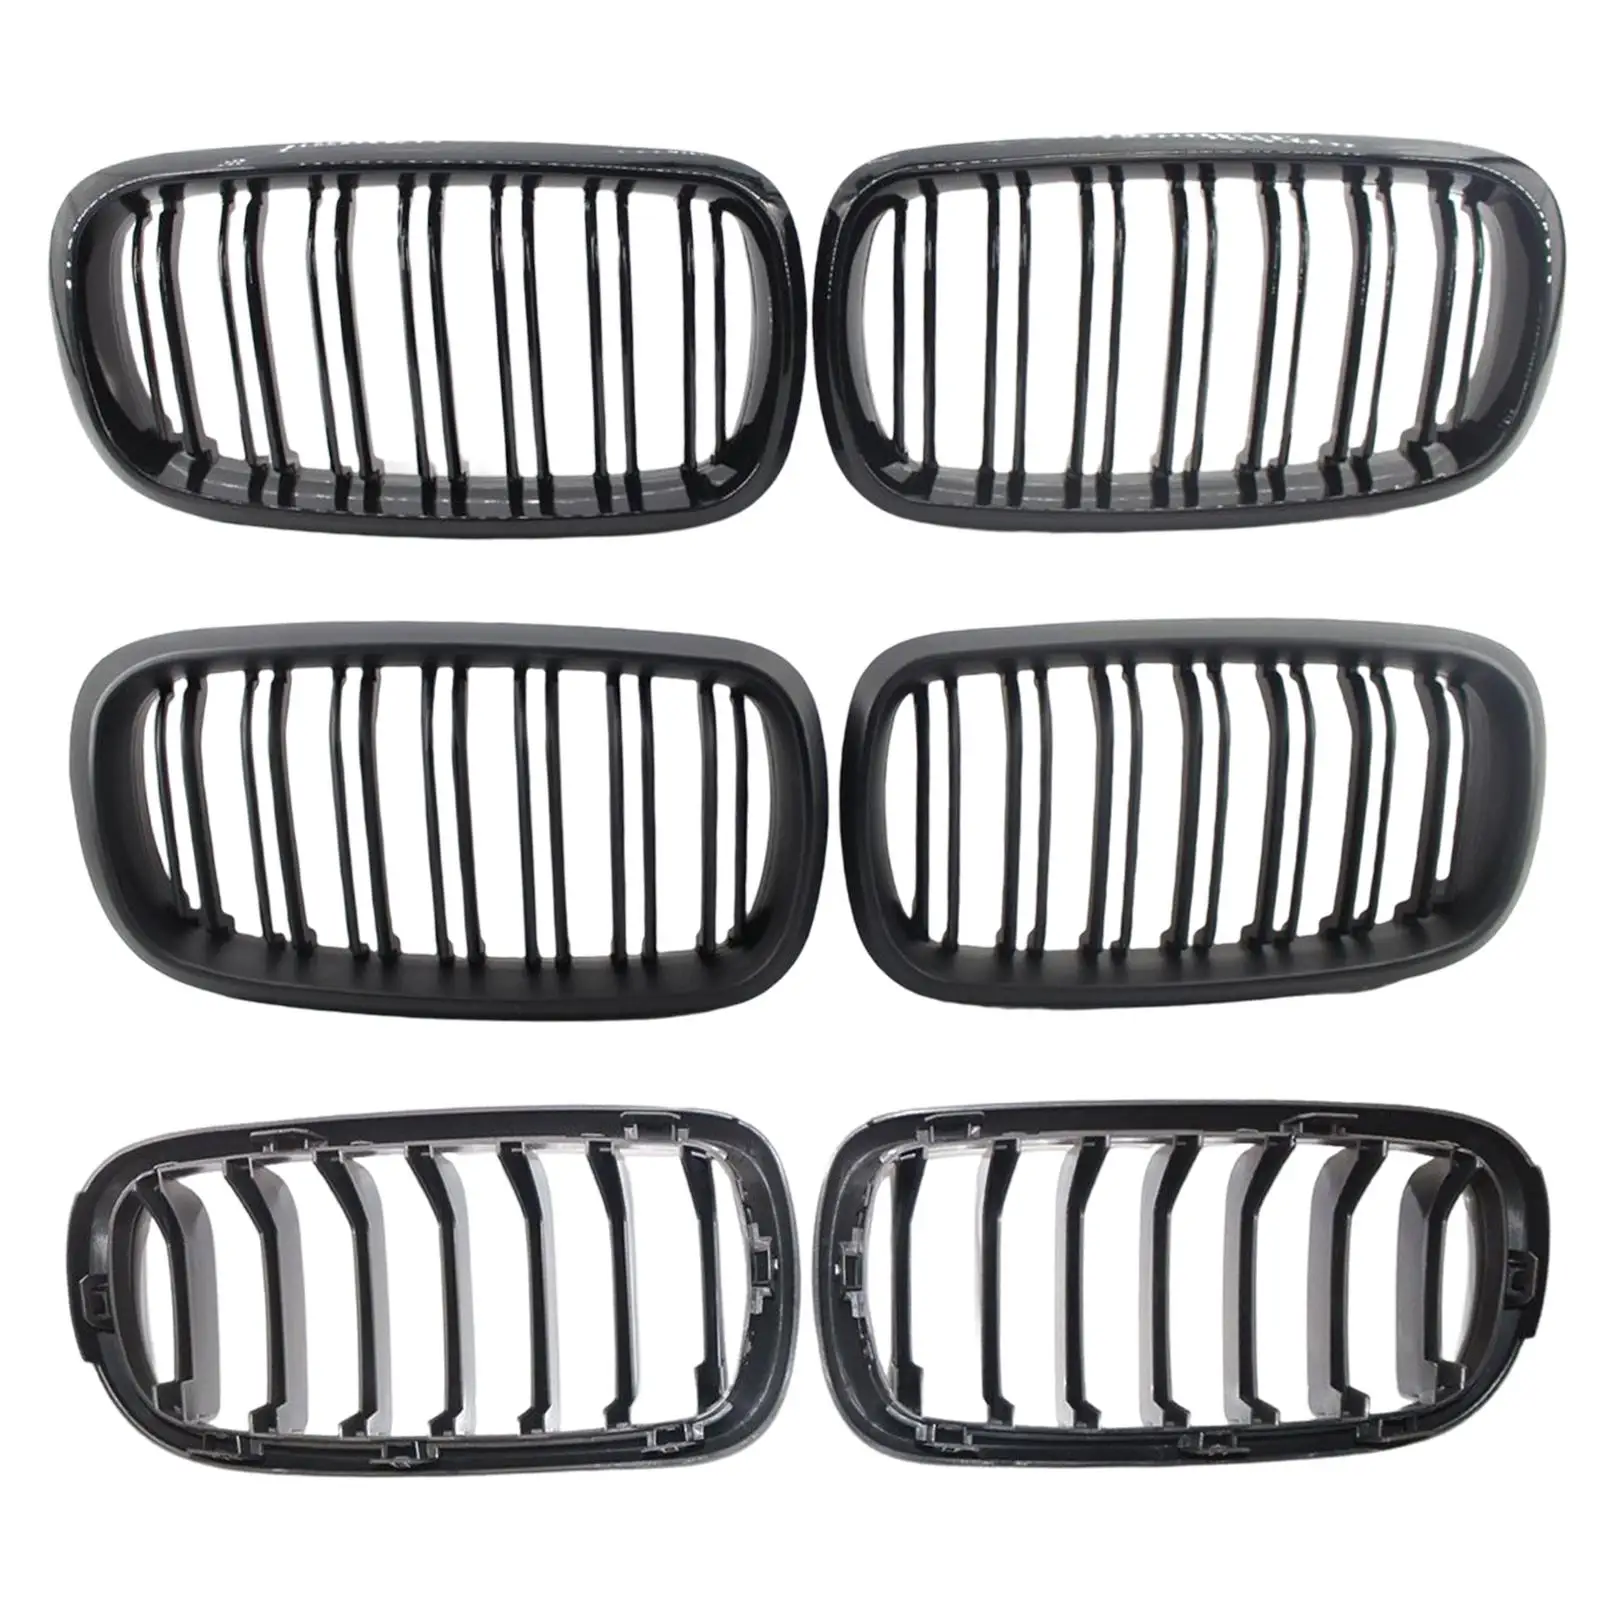 

Front Upper Kidney Grill Grille, 51117294486 51117294485 51137316061 51137316062 for x5 x6 F15 F16 2014-2017 Automotive ABS